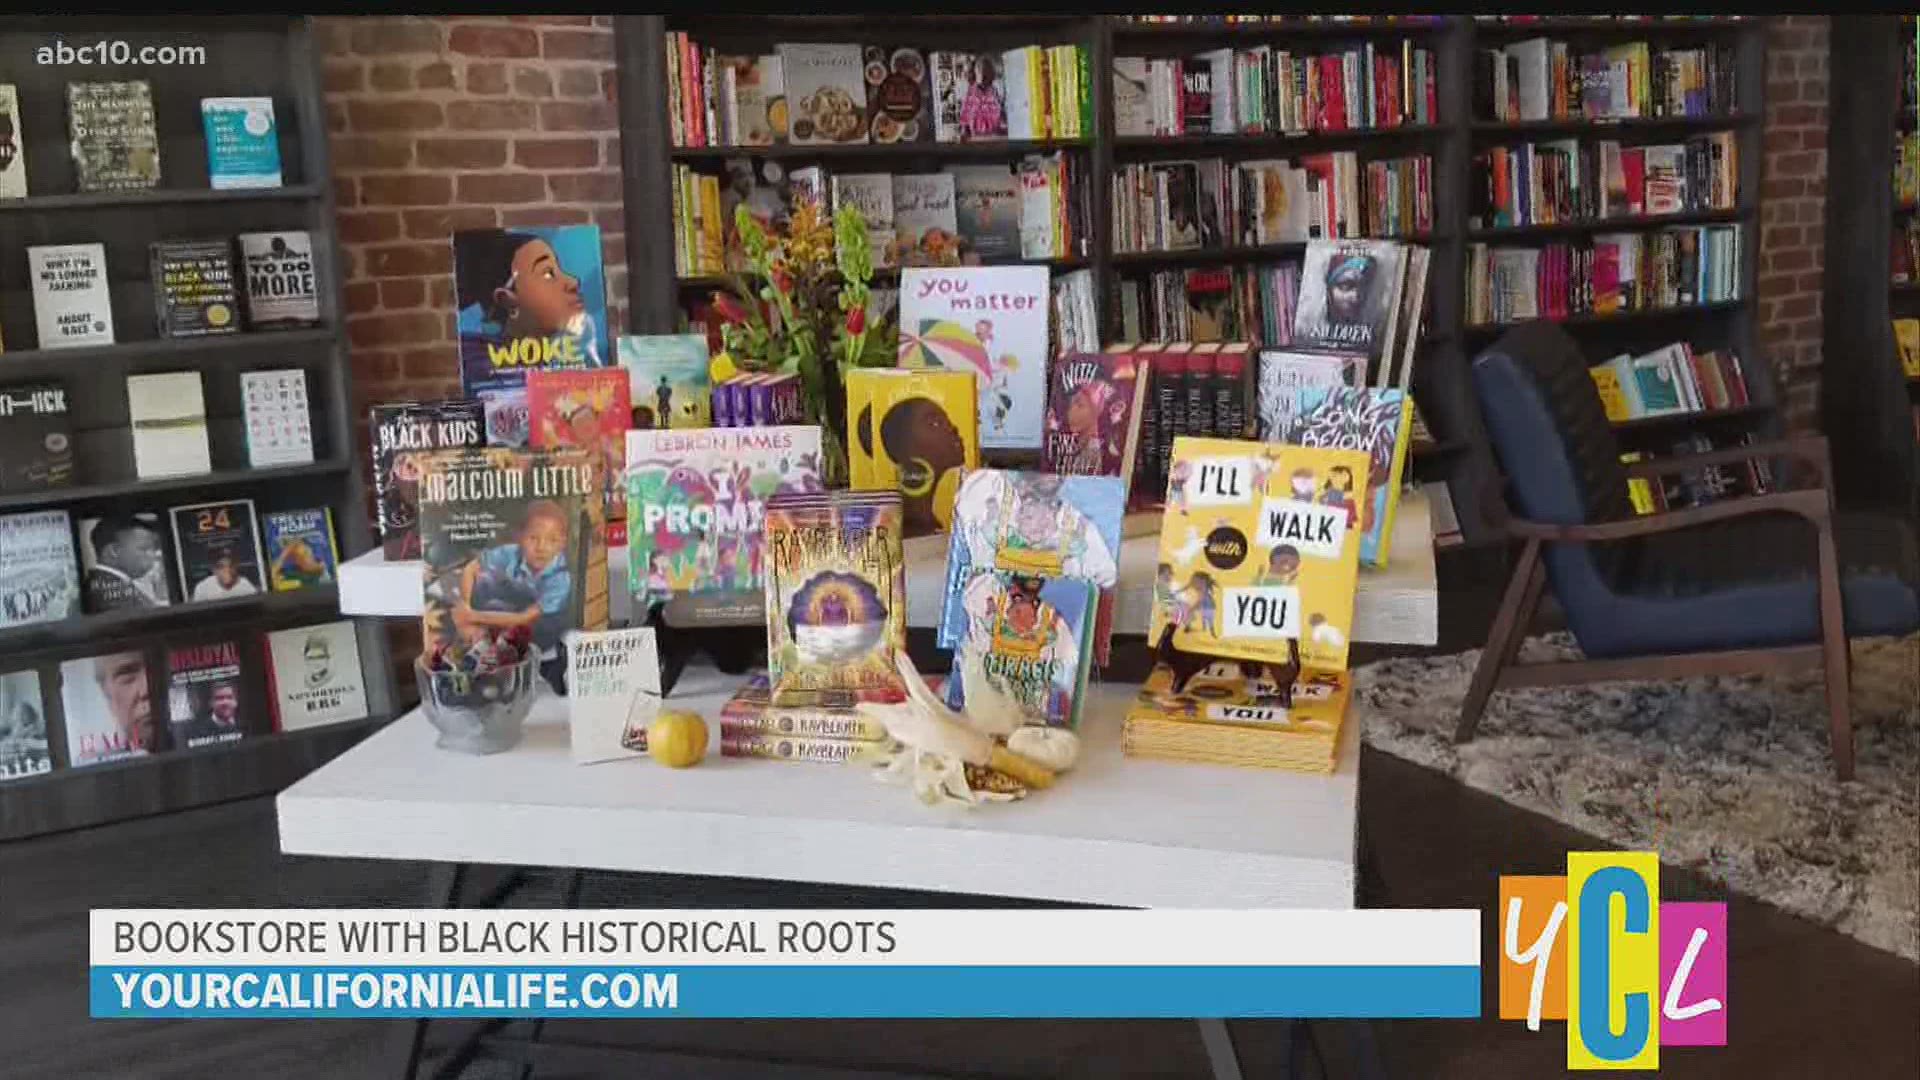 Underground Books' Mother Rose gives us a peek inside the Oak Park bookstore and provides insight into the items and events offered to highlight Black culture.